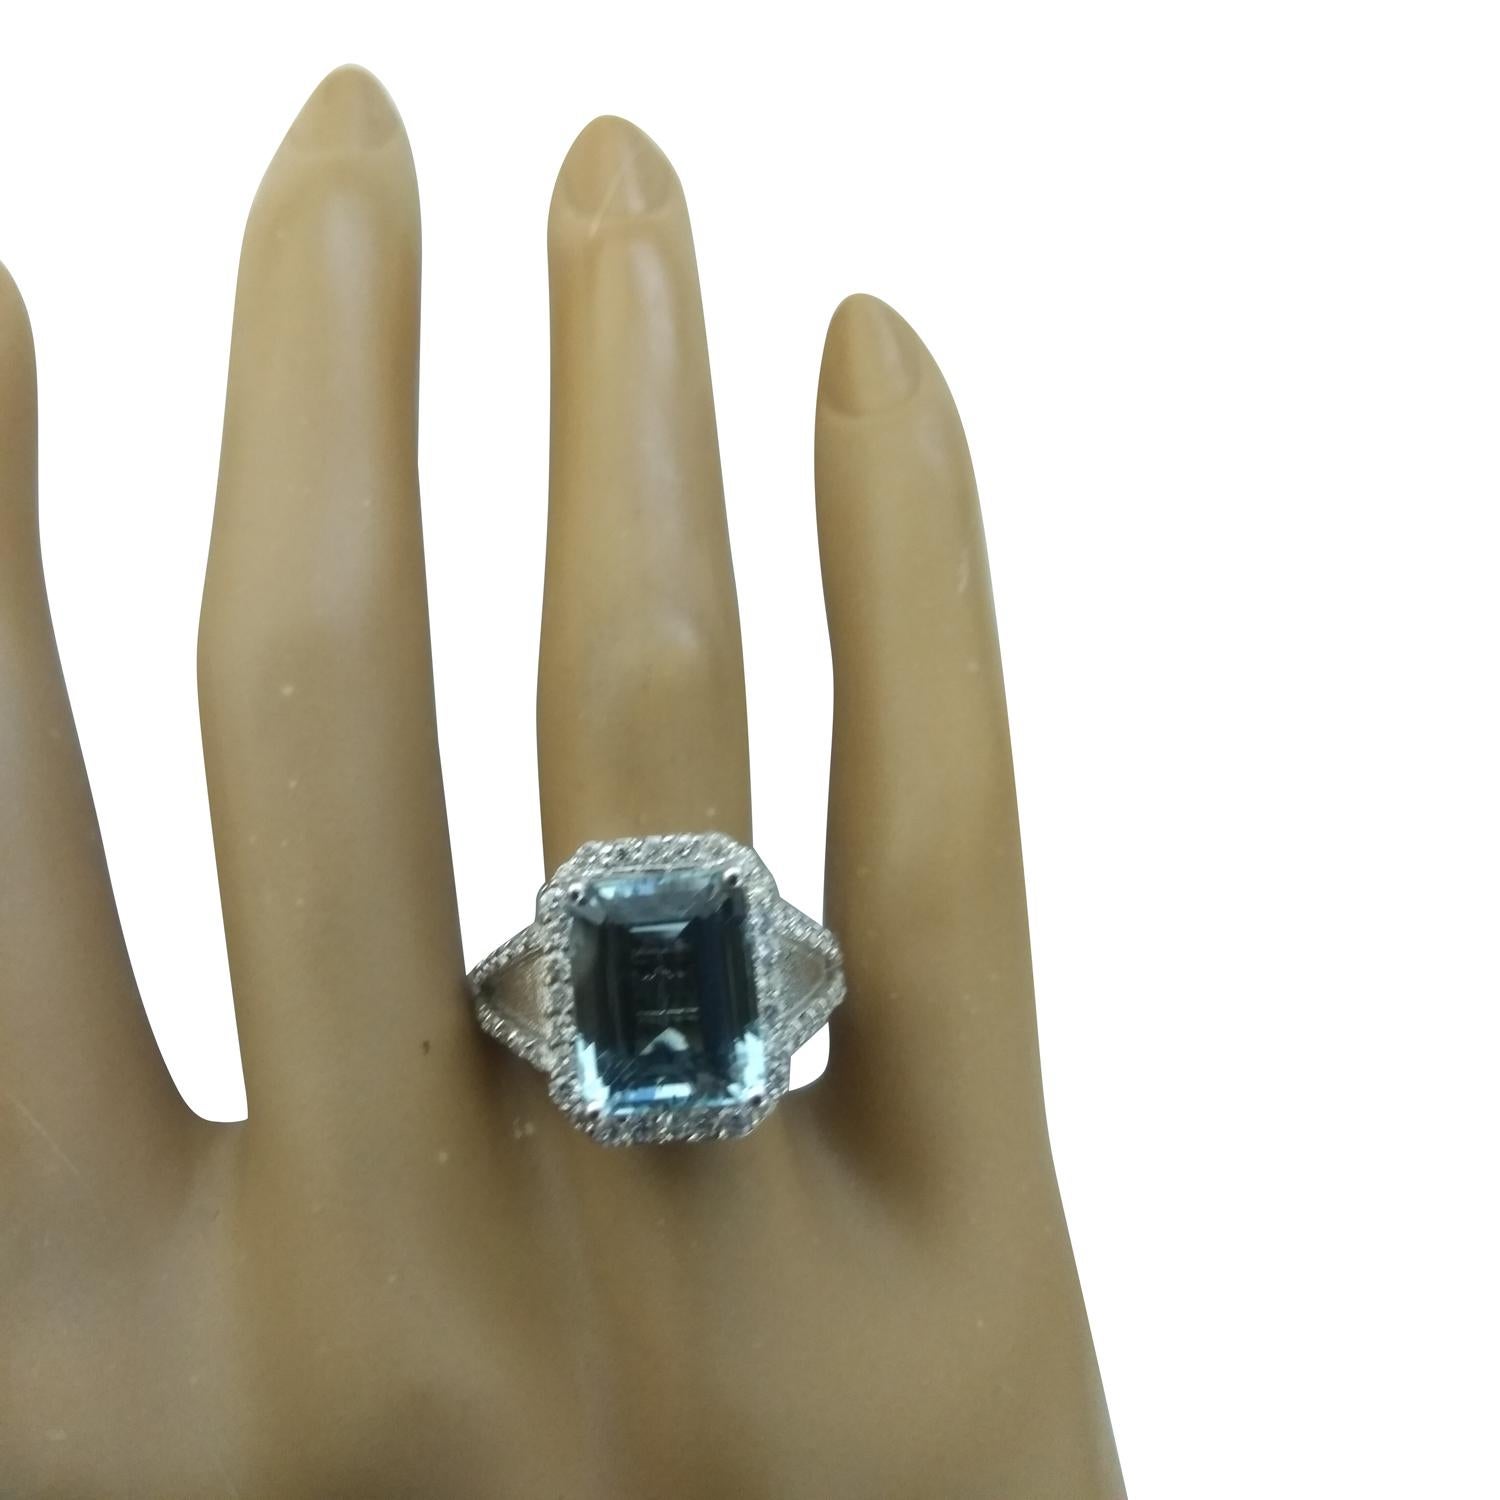 5.90 Carat Natural Aquamarine 14 Karat Solid White Gold Diamond Ring
Stamped: 14K 
Total Ring Weight: 6.5 Grams 
Aquamarine Weight 5.20 Carat (11.00x9.00 Millimeters)
Diamond Weight: 0.70 carat (F-G Color, VS2-SI1 Clarity )
Quantity: 56
Face